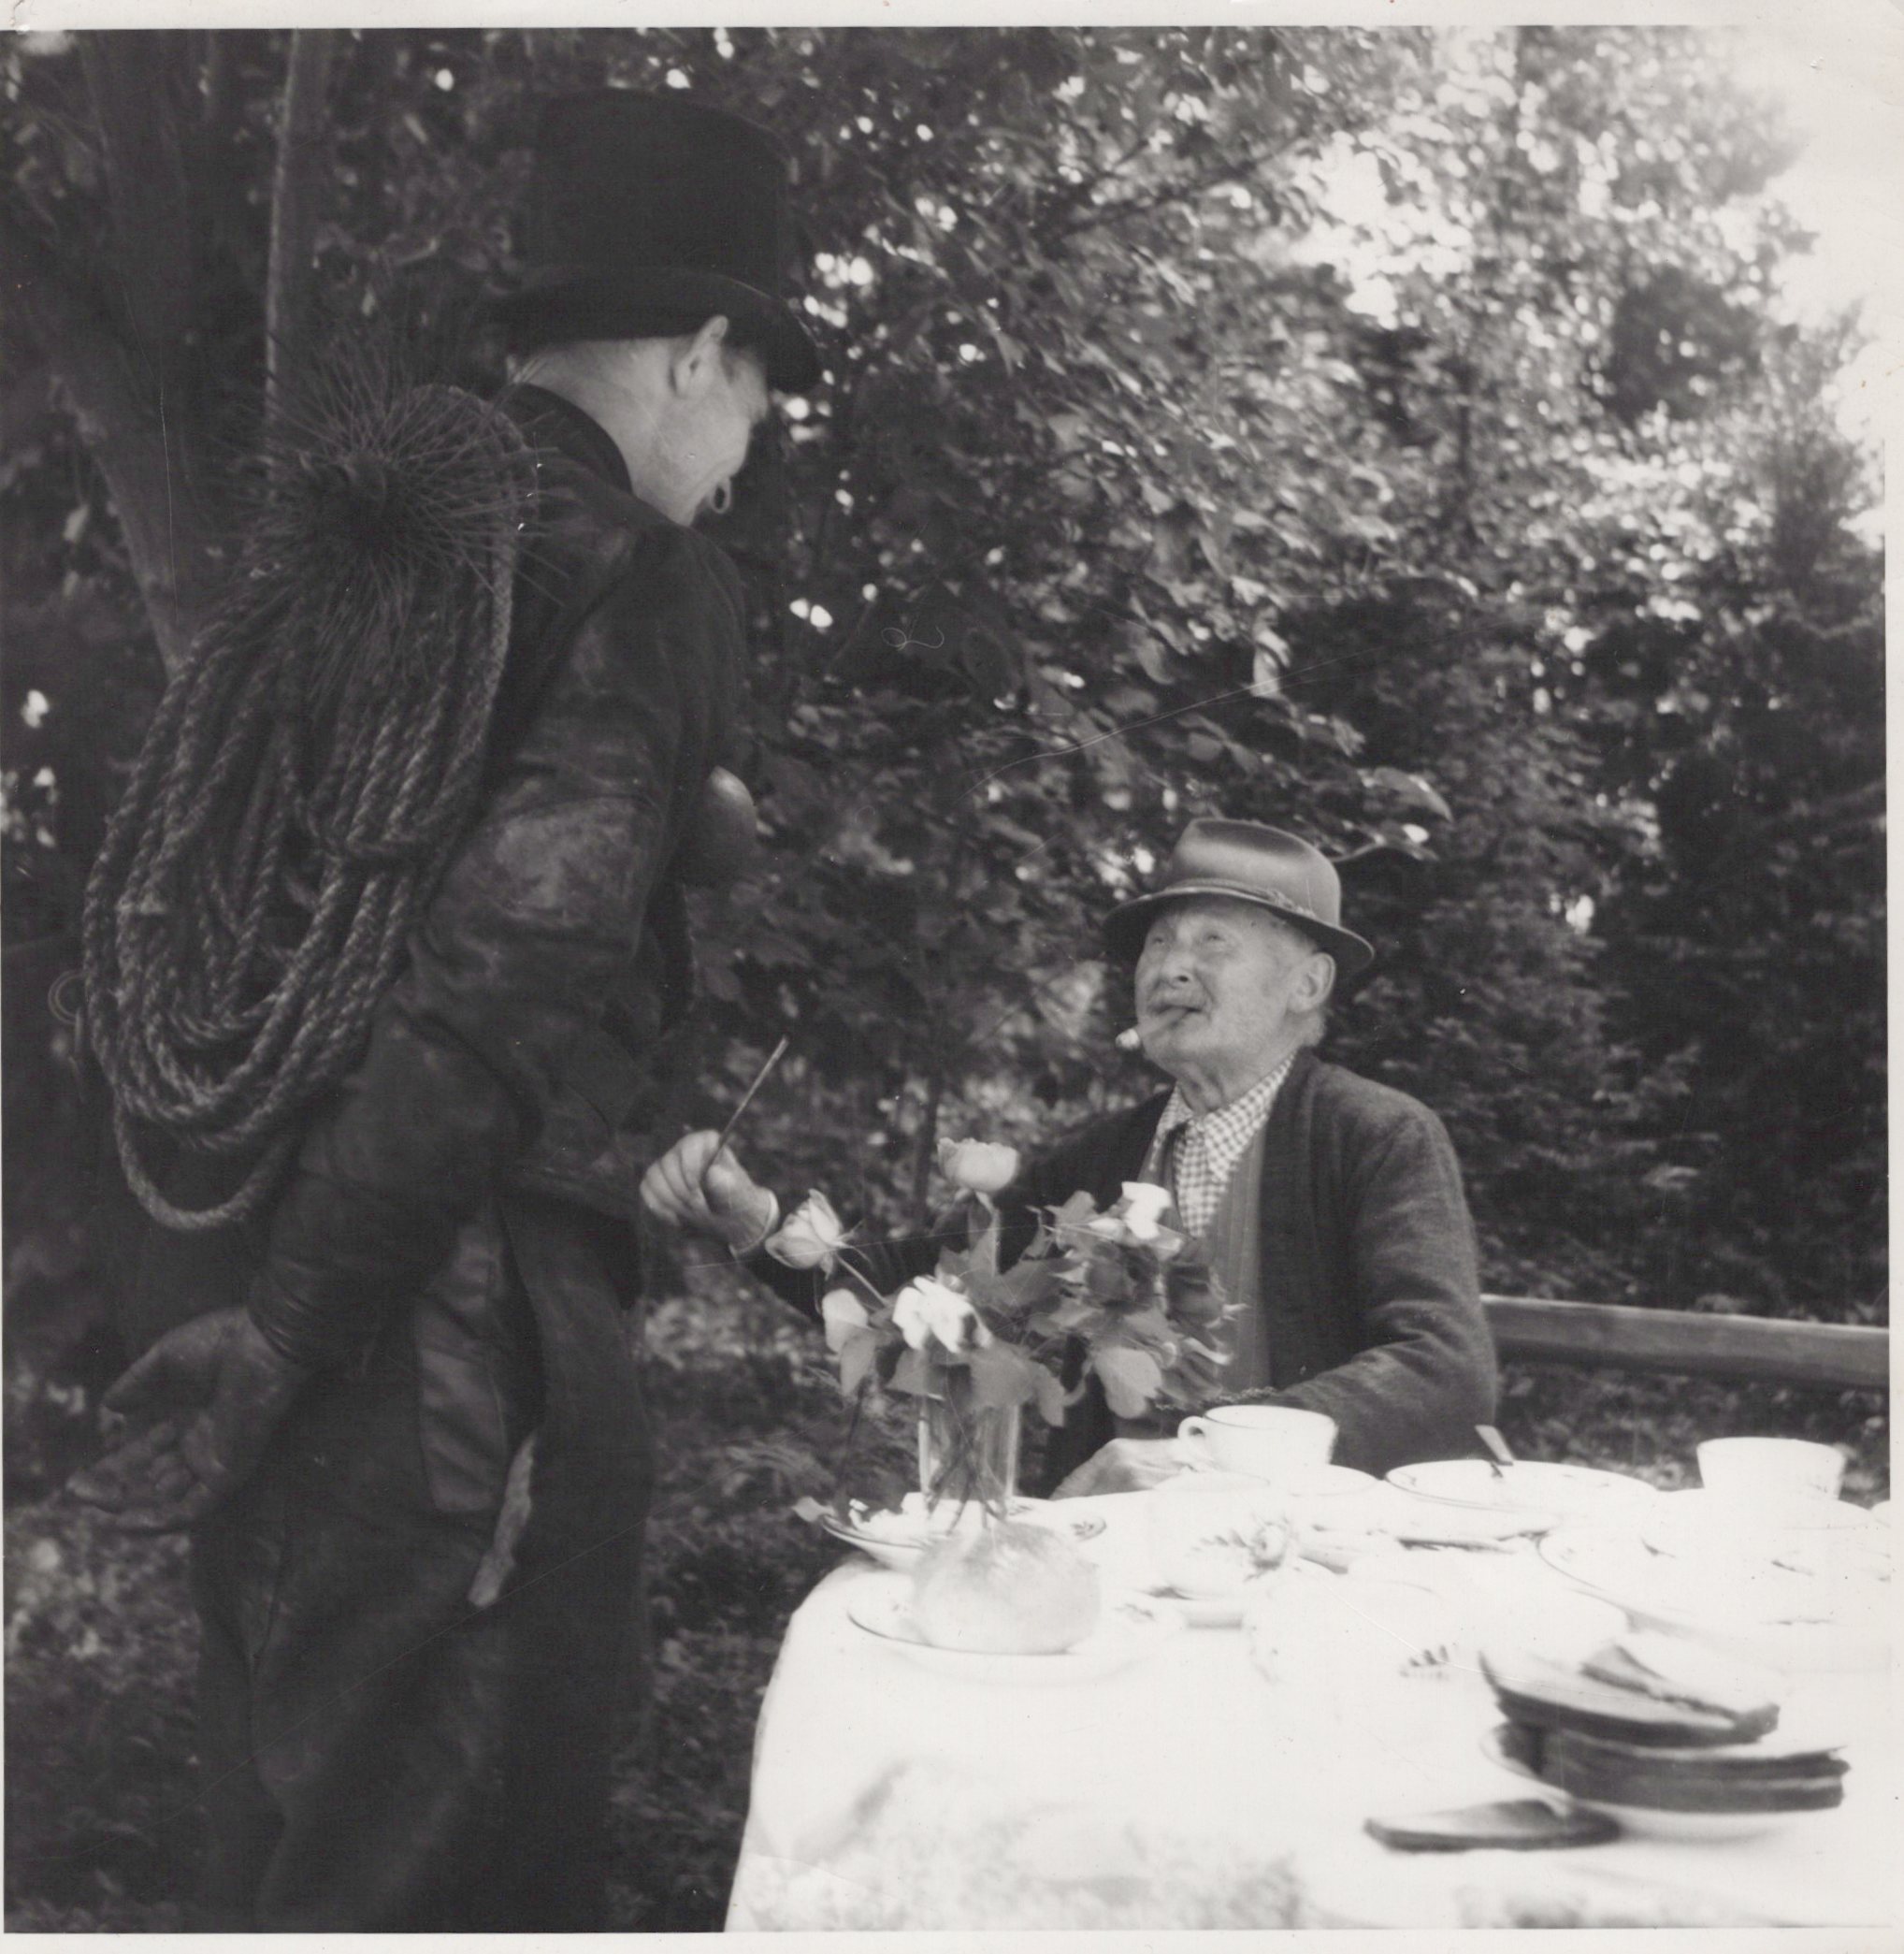 Wilhelm Behnke In Germany shaking the local Chimney Sweeps Hand for Good Luck